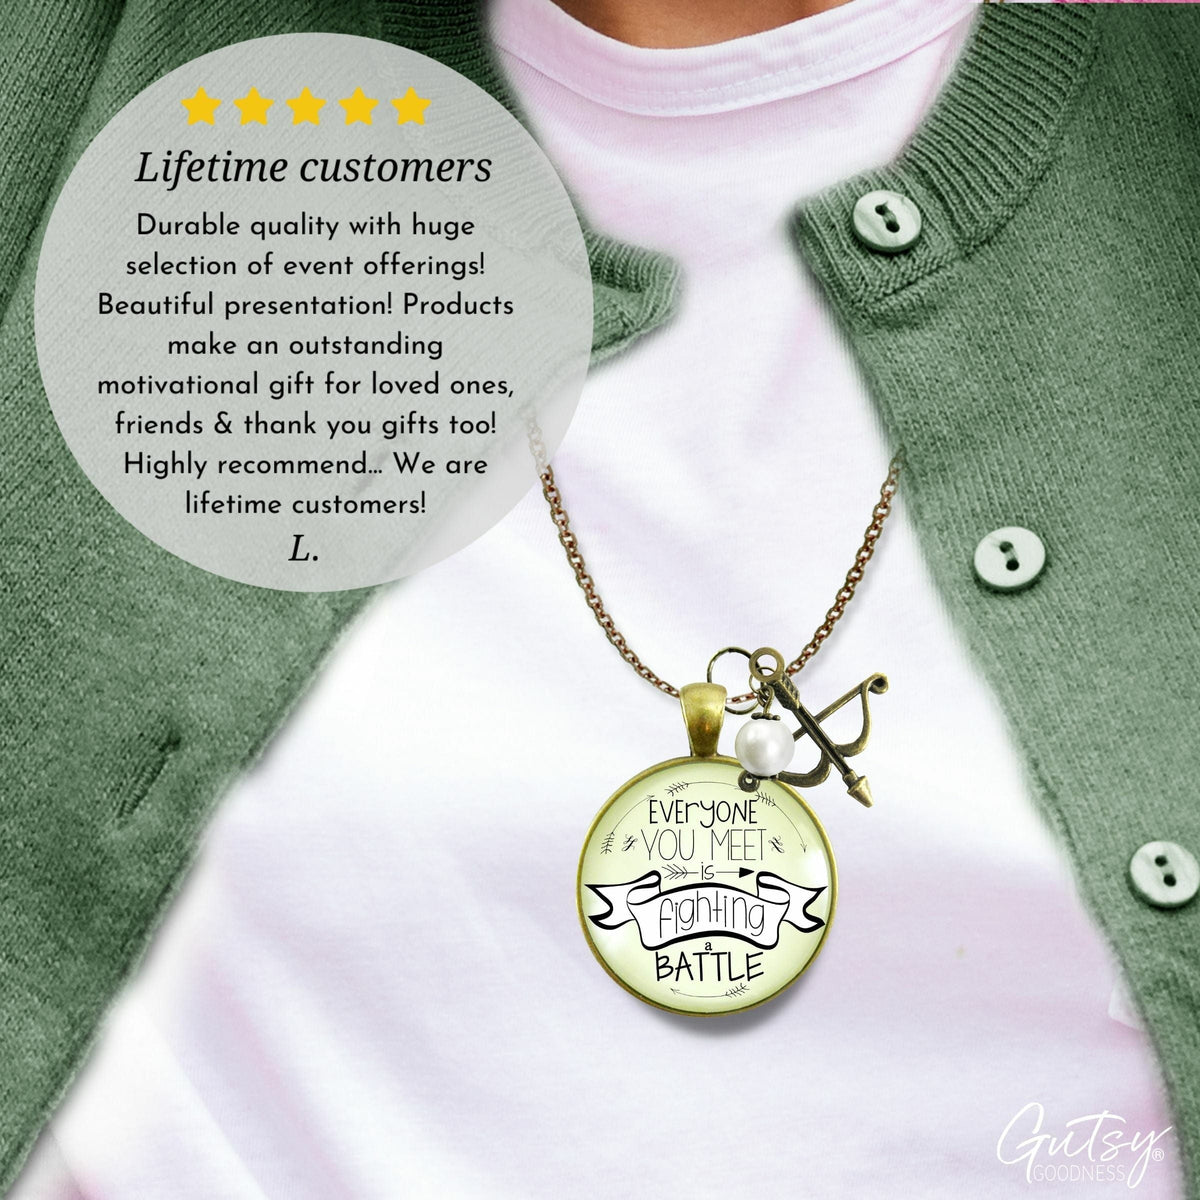 Gutsy Goodness Everyone You Meet is Fighting a Battle Warrior Necklace Jewelry - Gutsy Goodness Handmade Jewelry;Everyone You Meet Is Fighting A Battle Warrior Necklace Jewelry - Gutsy Goodness Handmade Jewelry Gifts